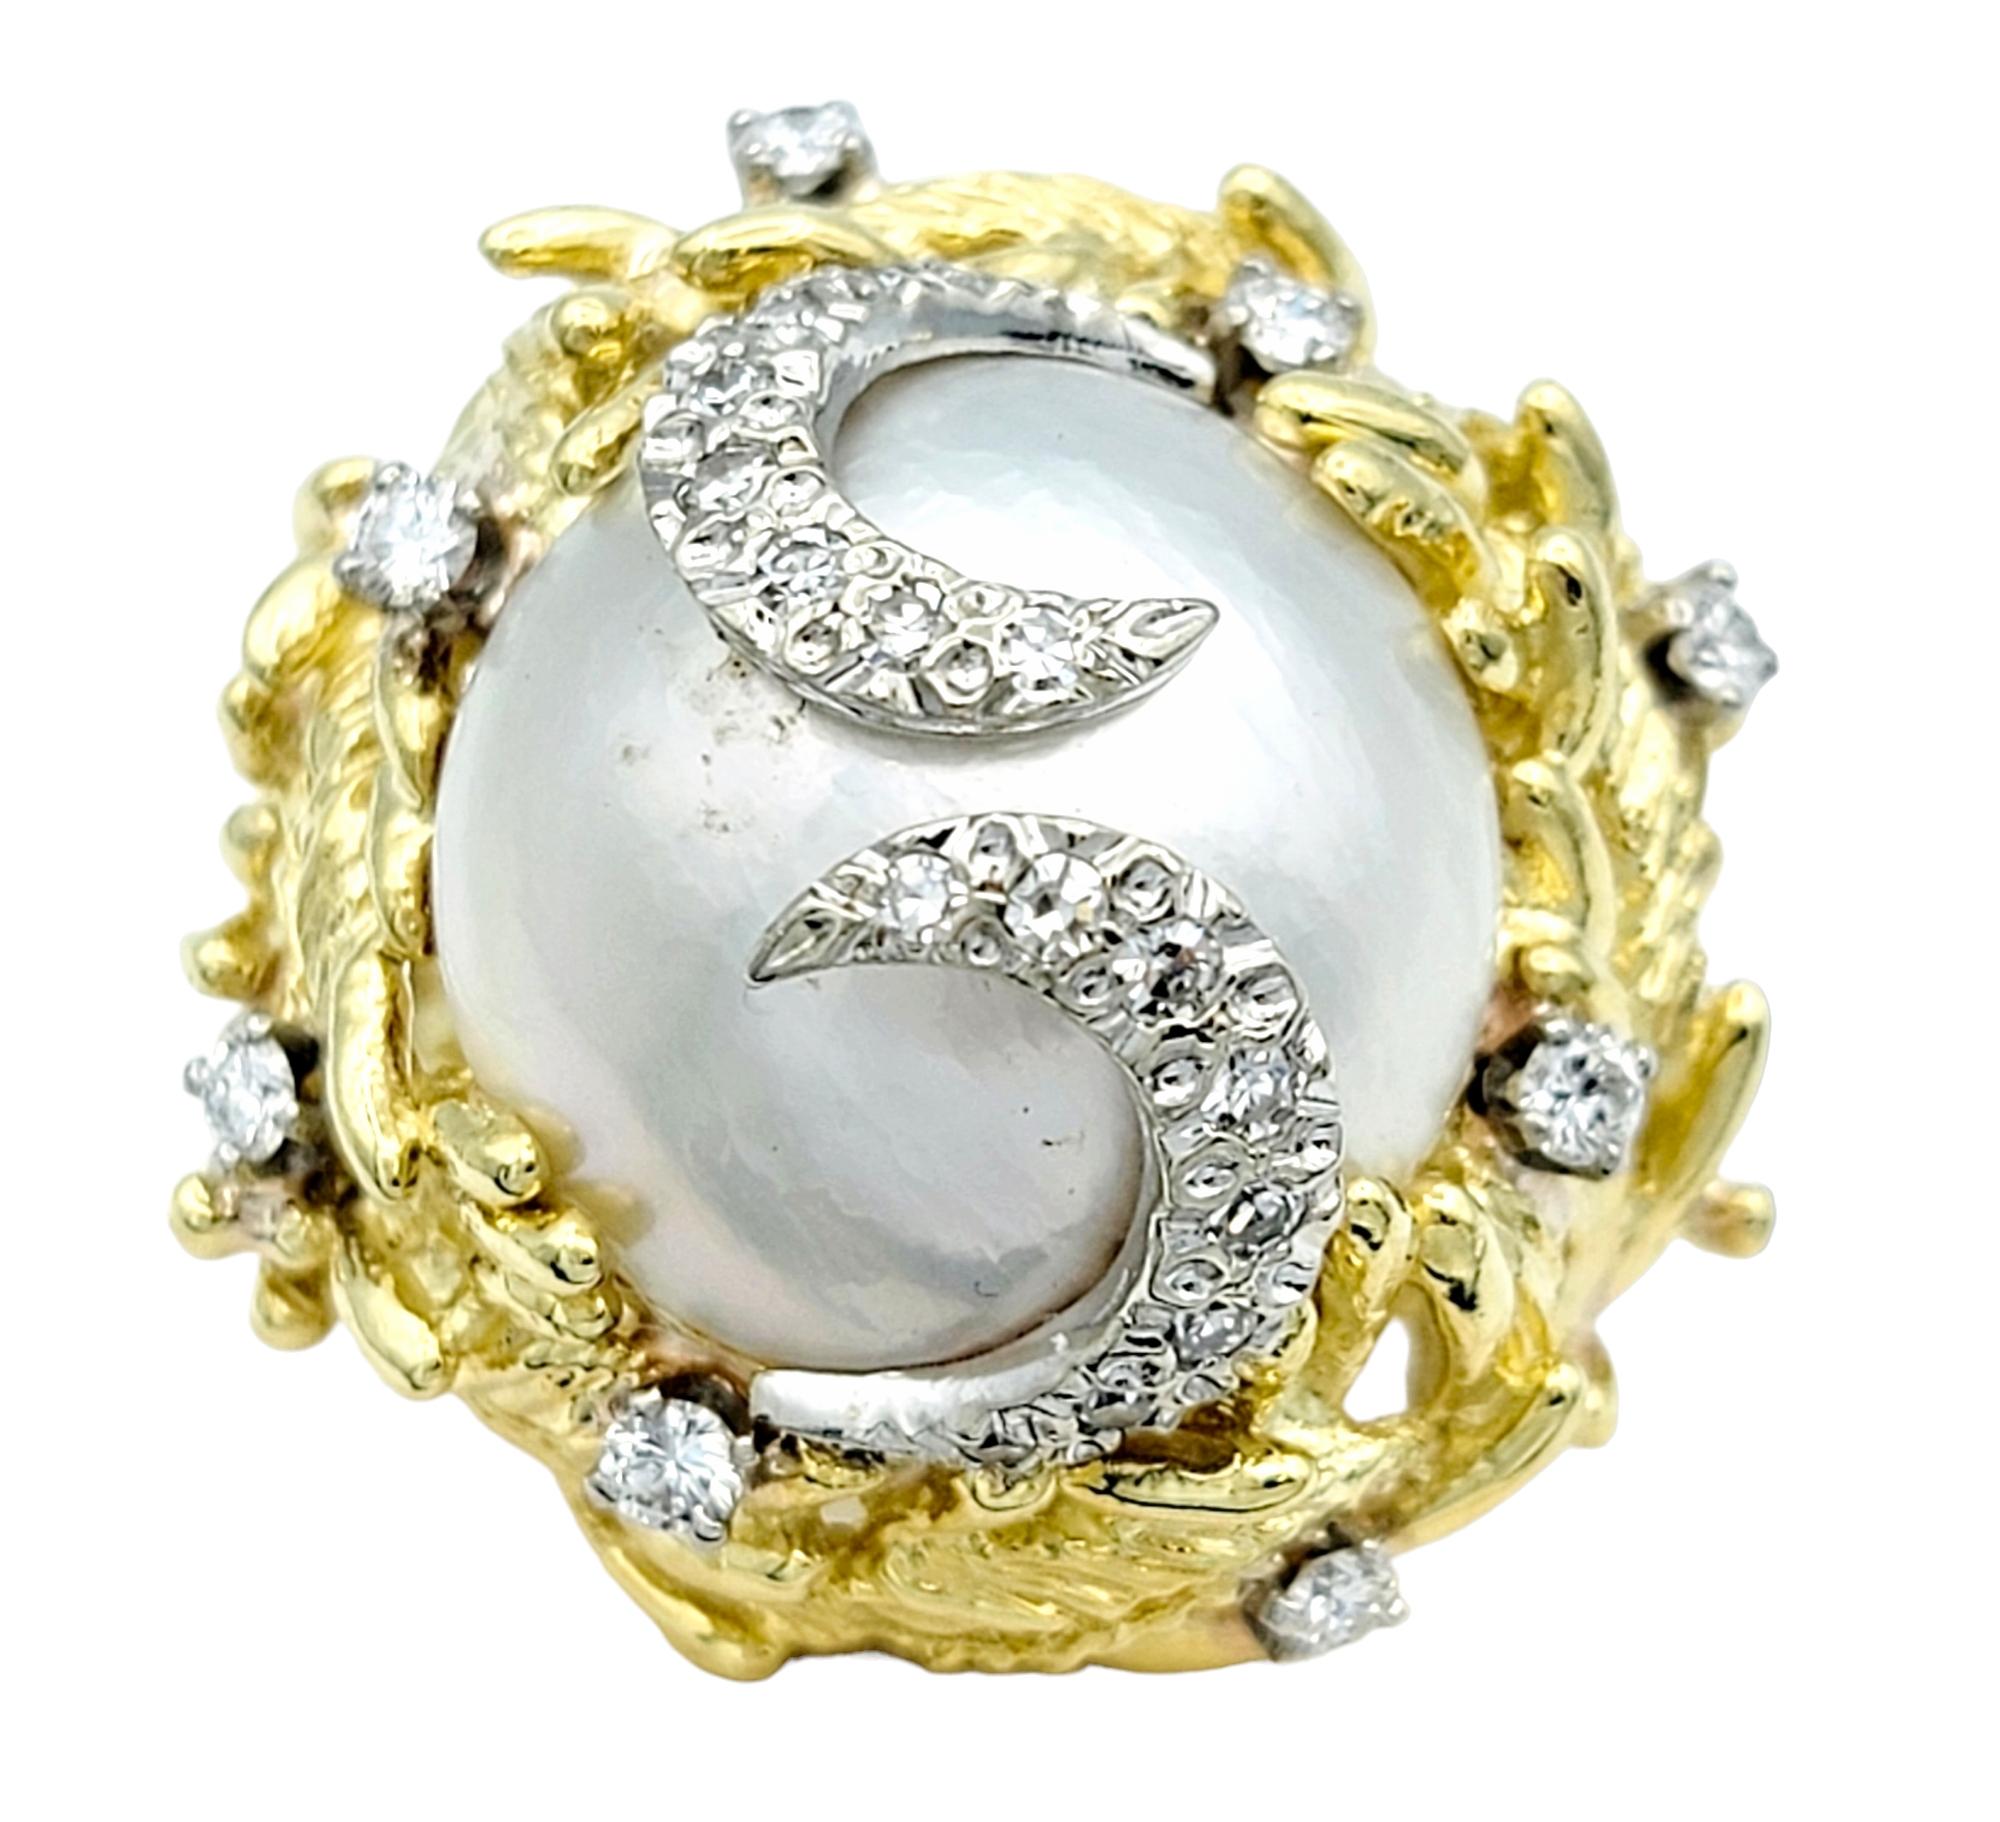 Ring size: 5.75

This captivating cocktail ring, a grand statement of opulence and artistry, showcases a cultured cabochon center pearl with luminescent white hues, delicately adorned with subtle silver overtones. The pearl's pristine elegance is